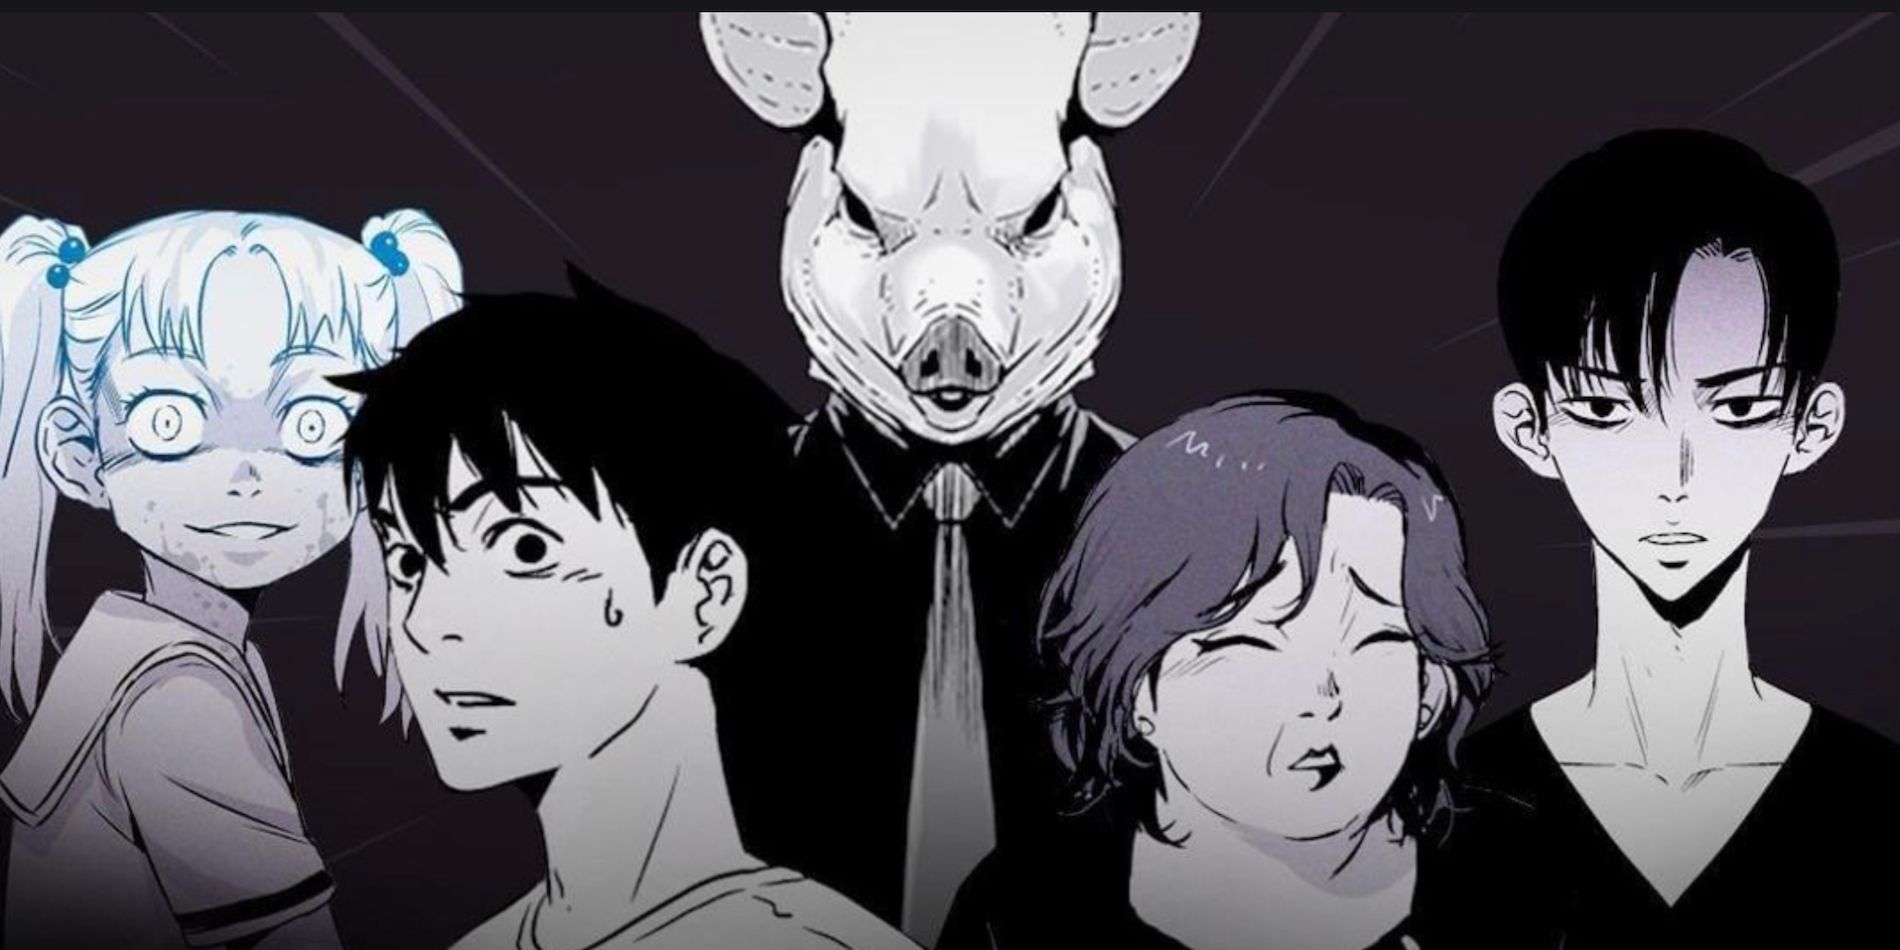 The victims assemble in the South Korean manhwa, Pigpen